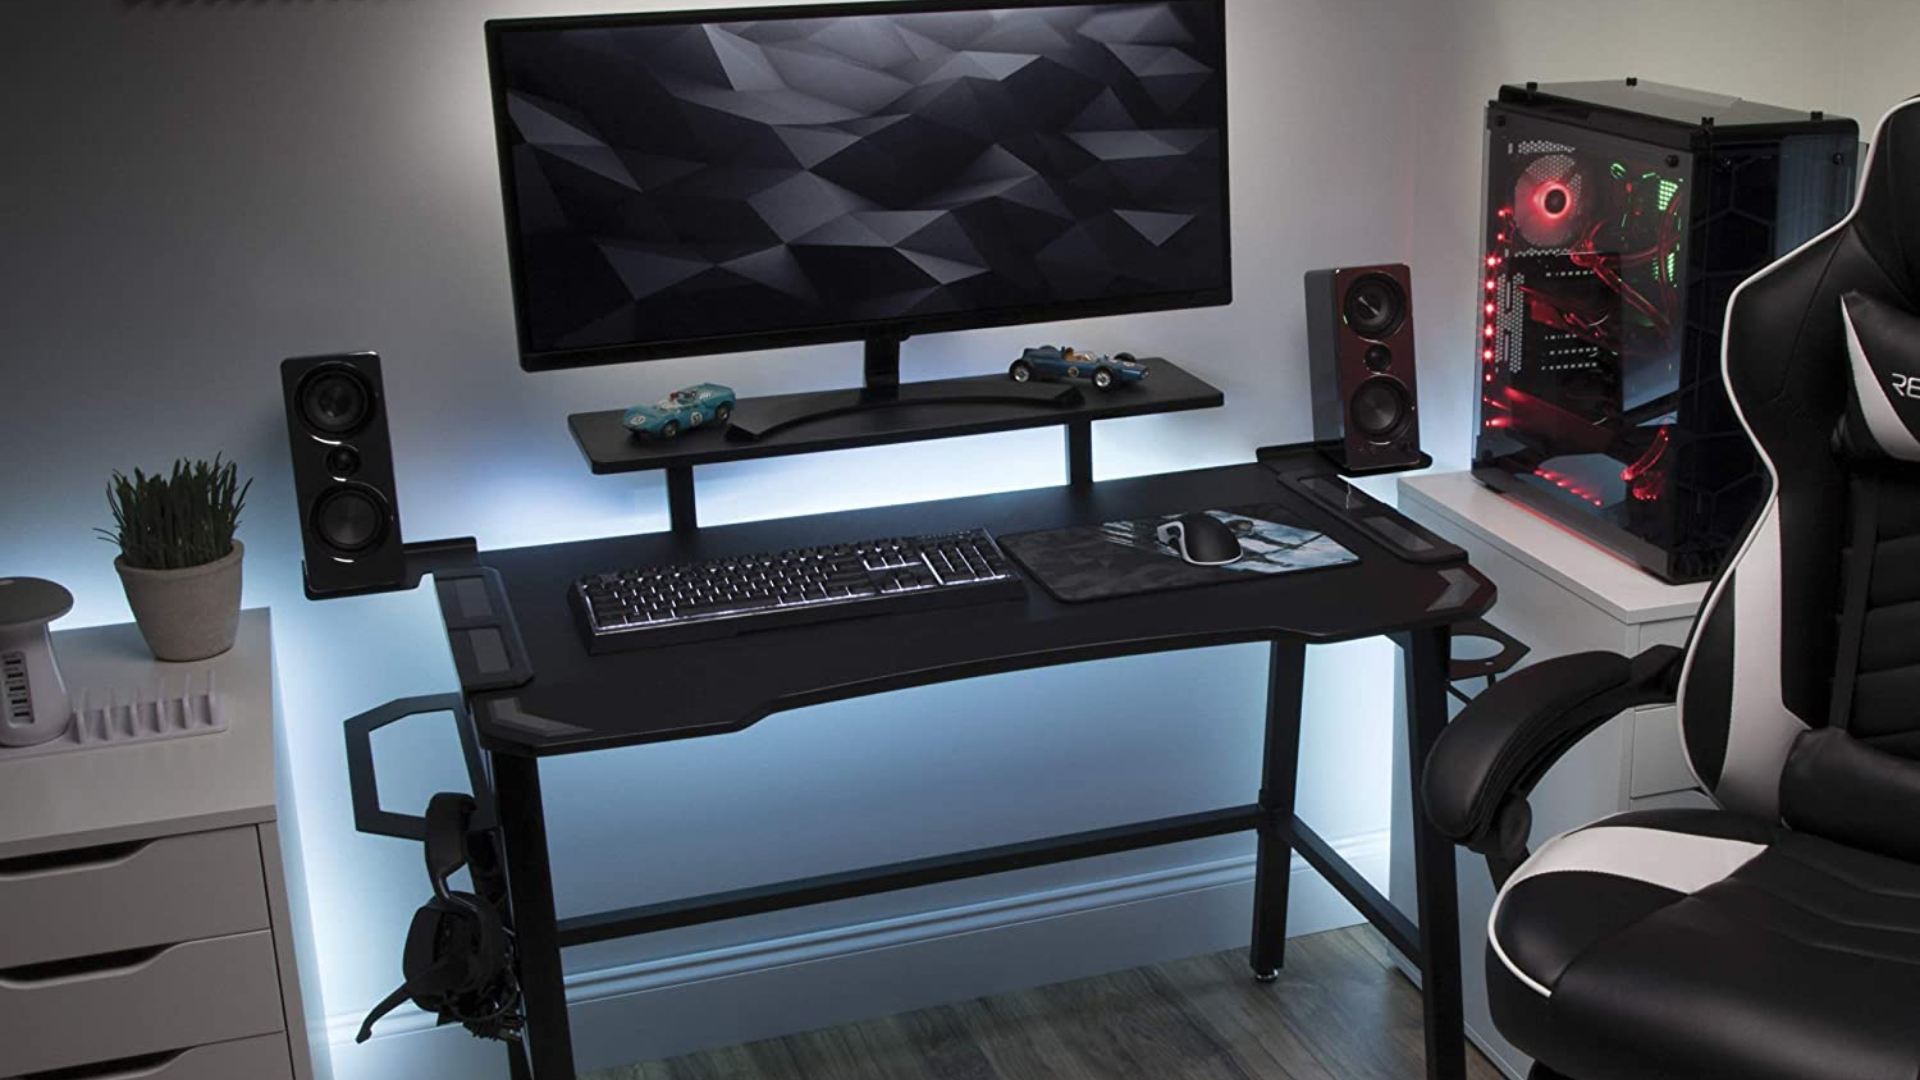 RESPAWN's 1010 gaming desk upgrades your PC setup of features at $168 (Reg. $220)